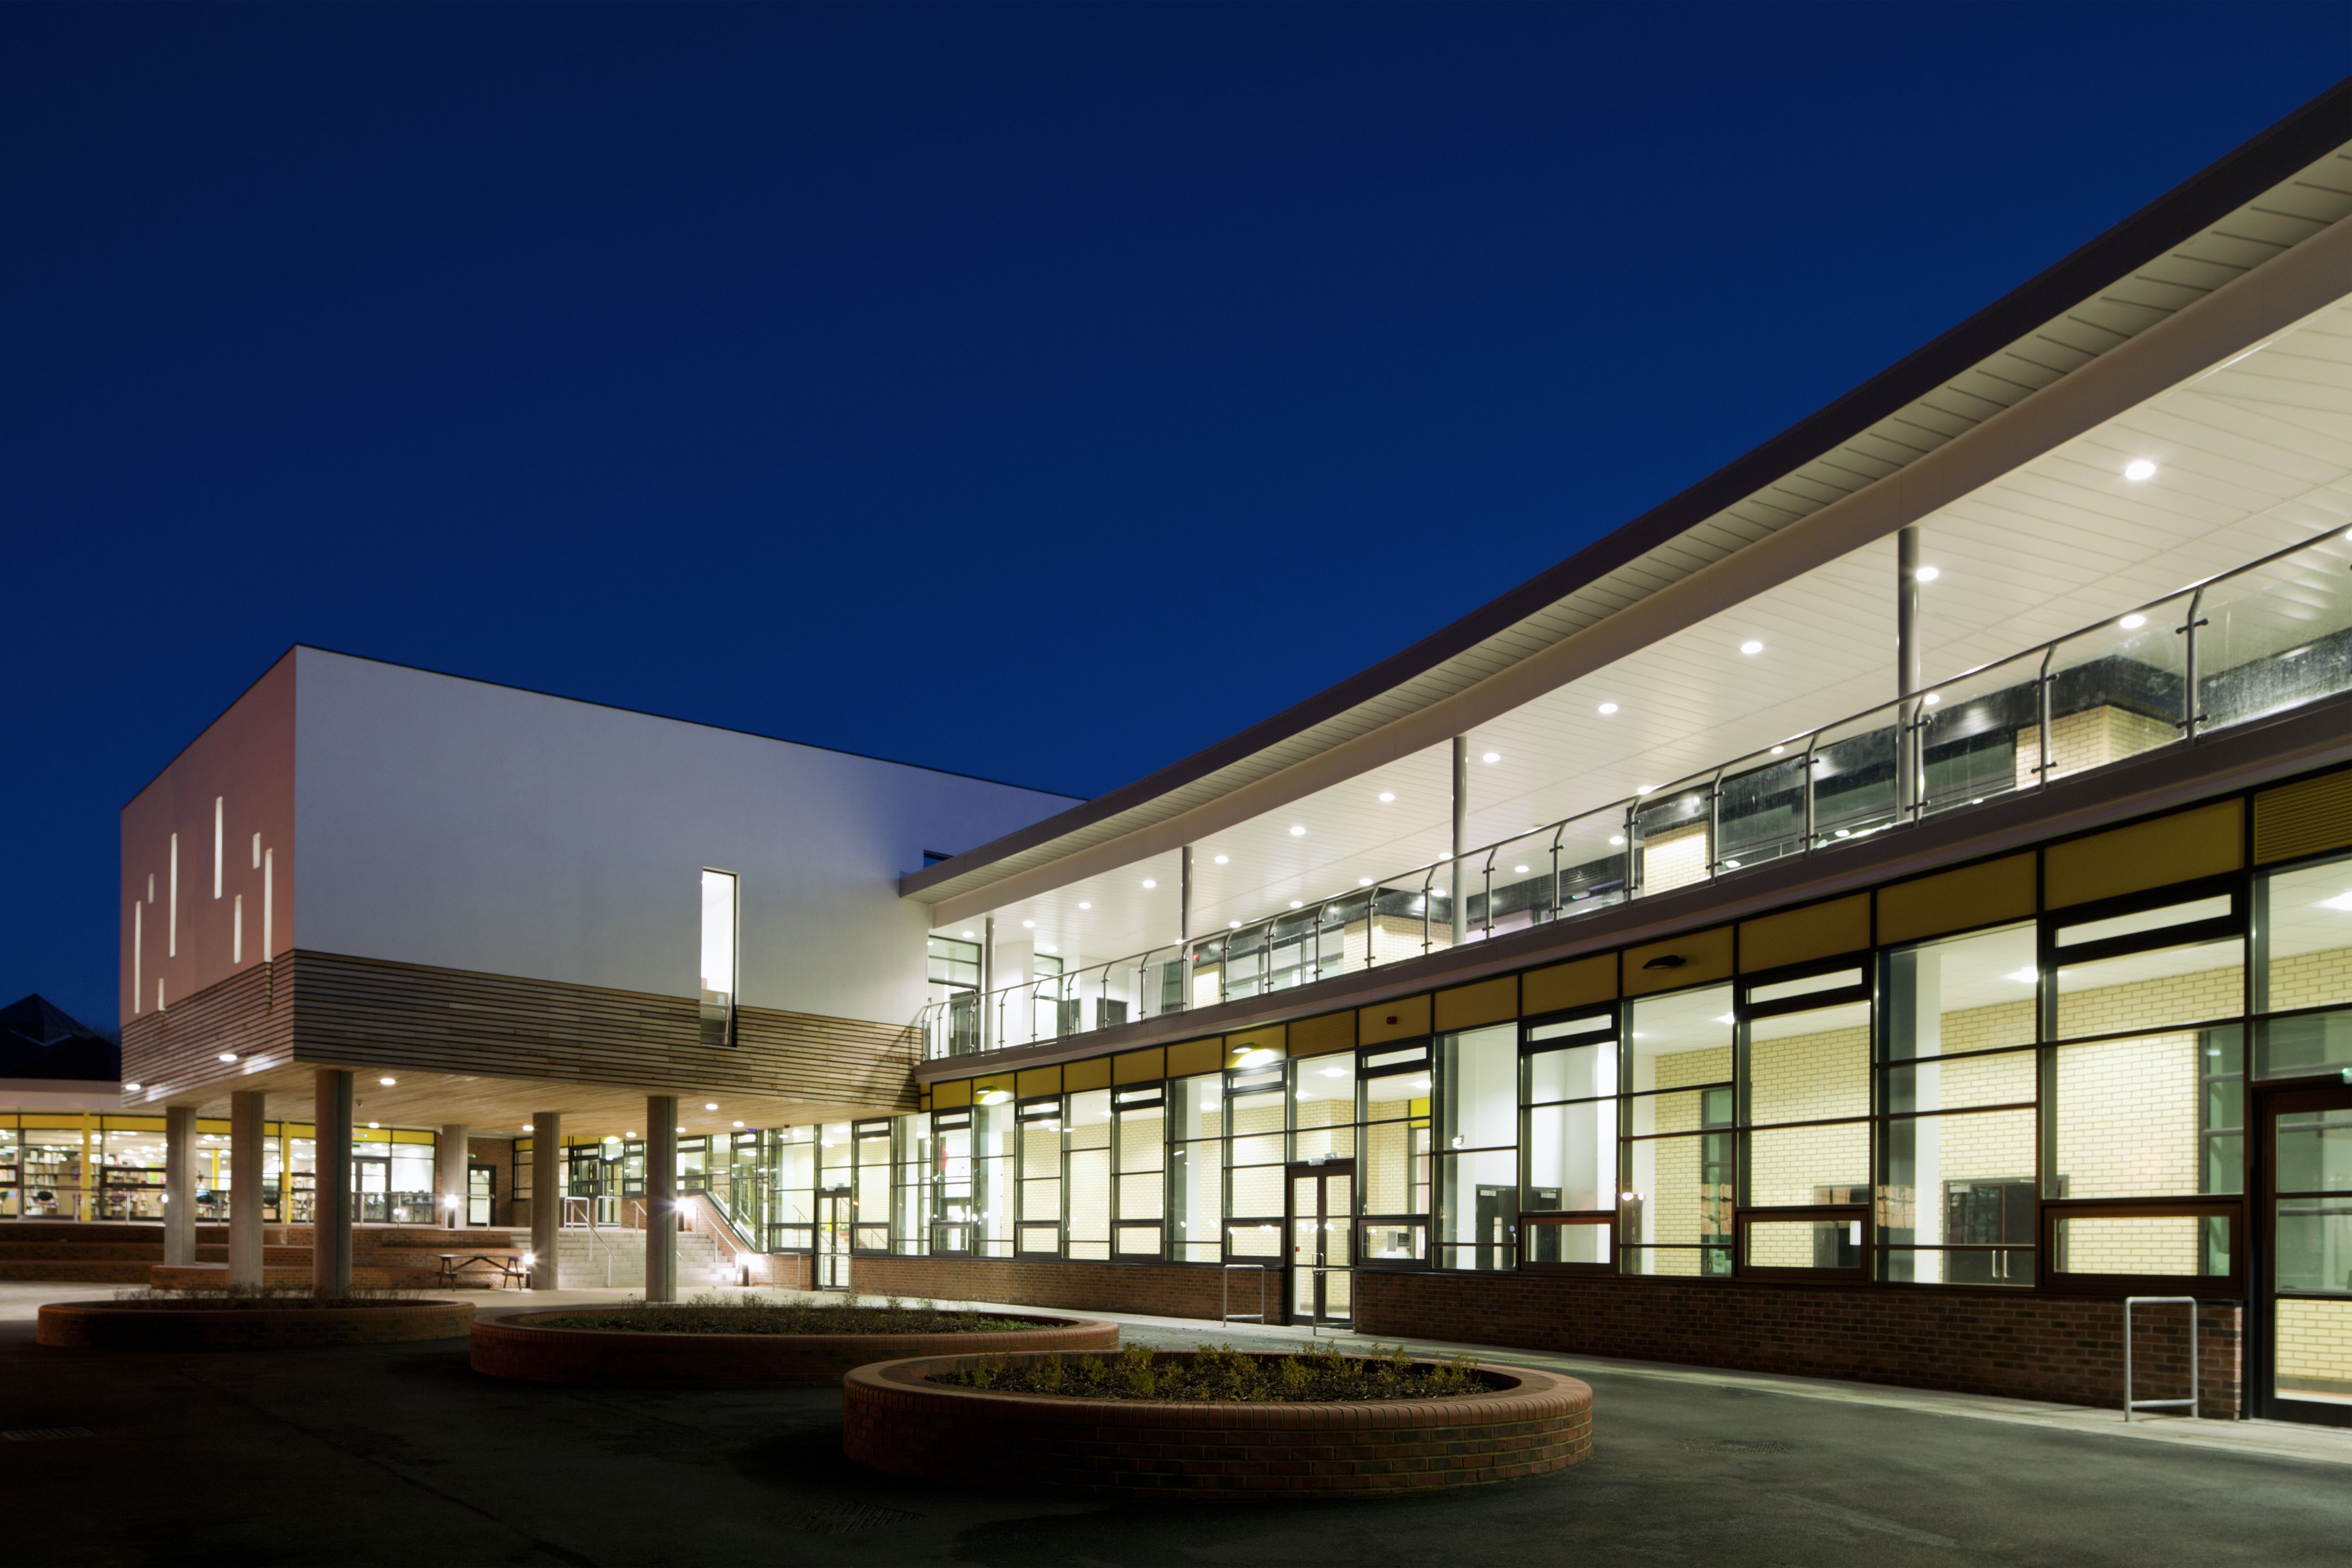 Exterior view of St Robert of Newminster School at night